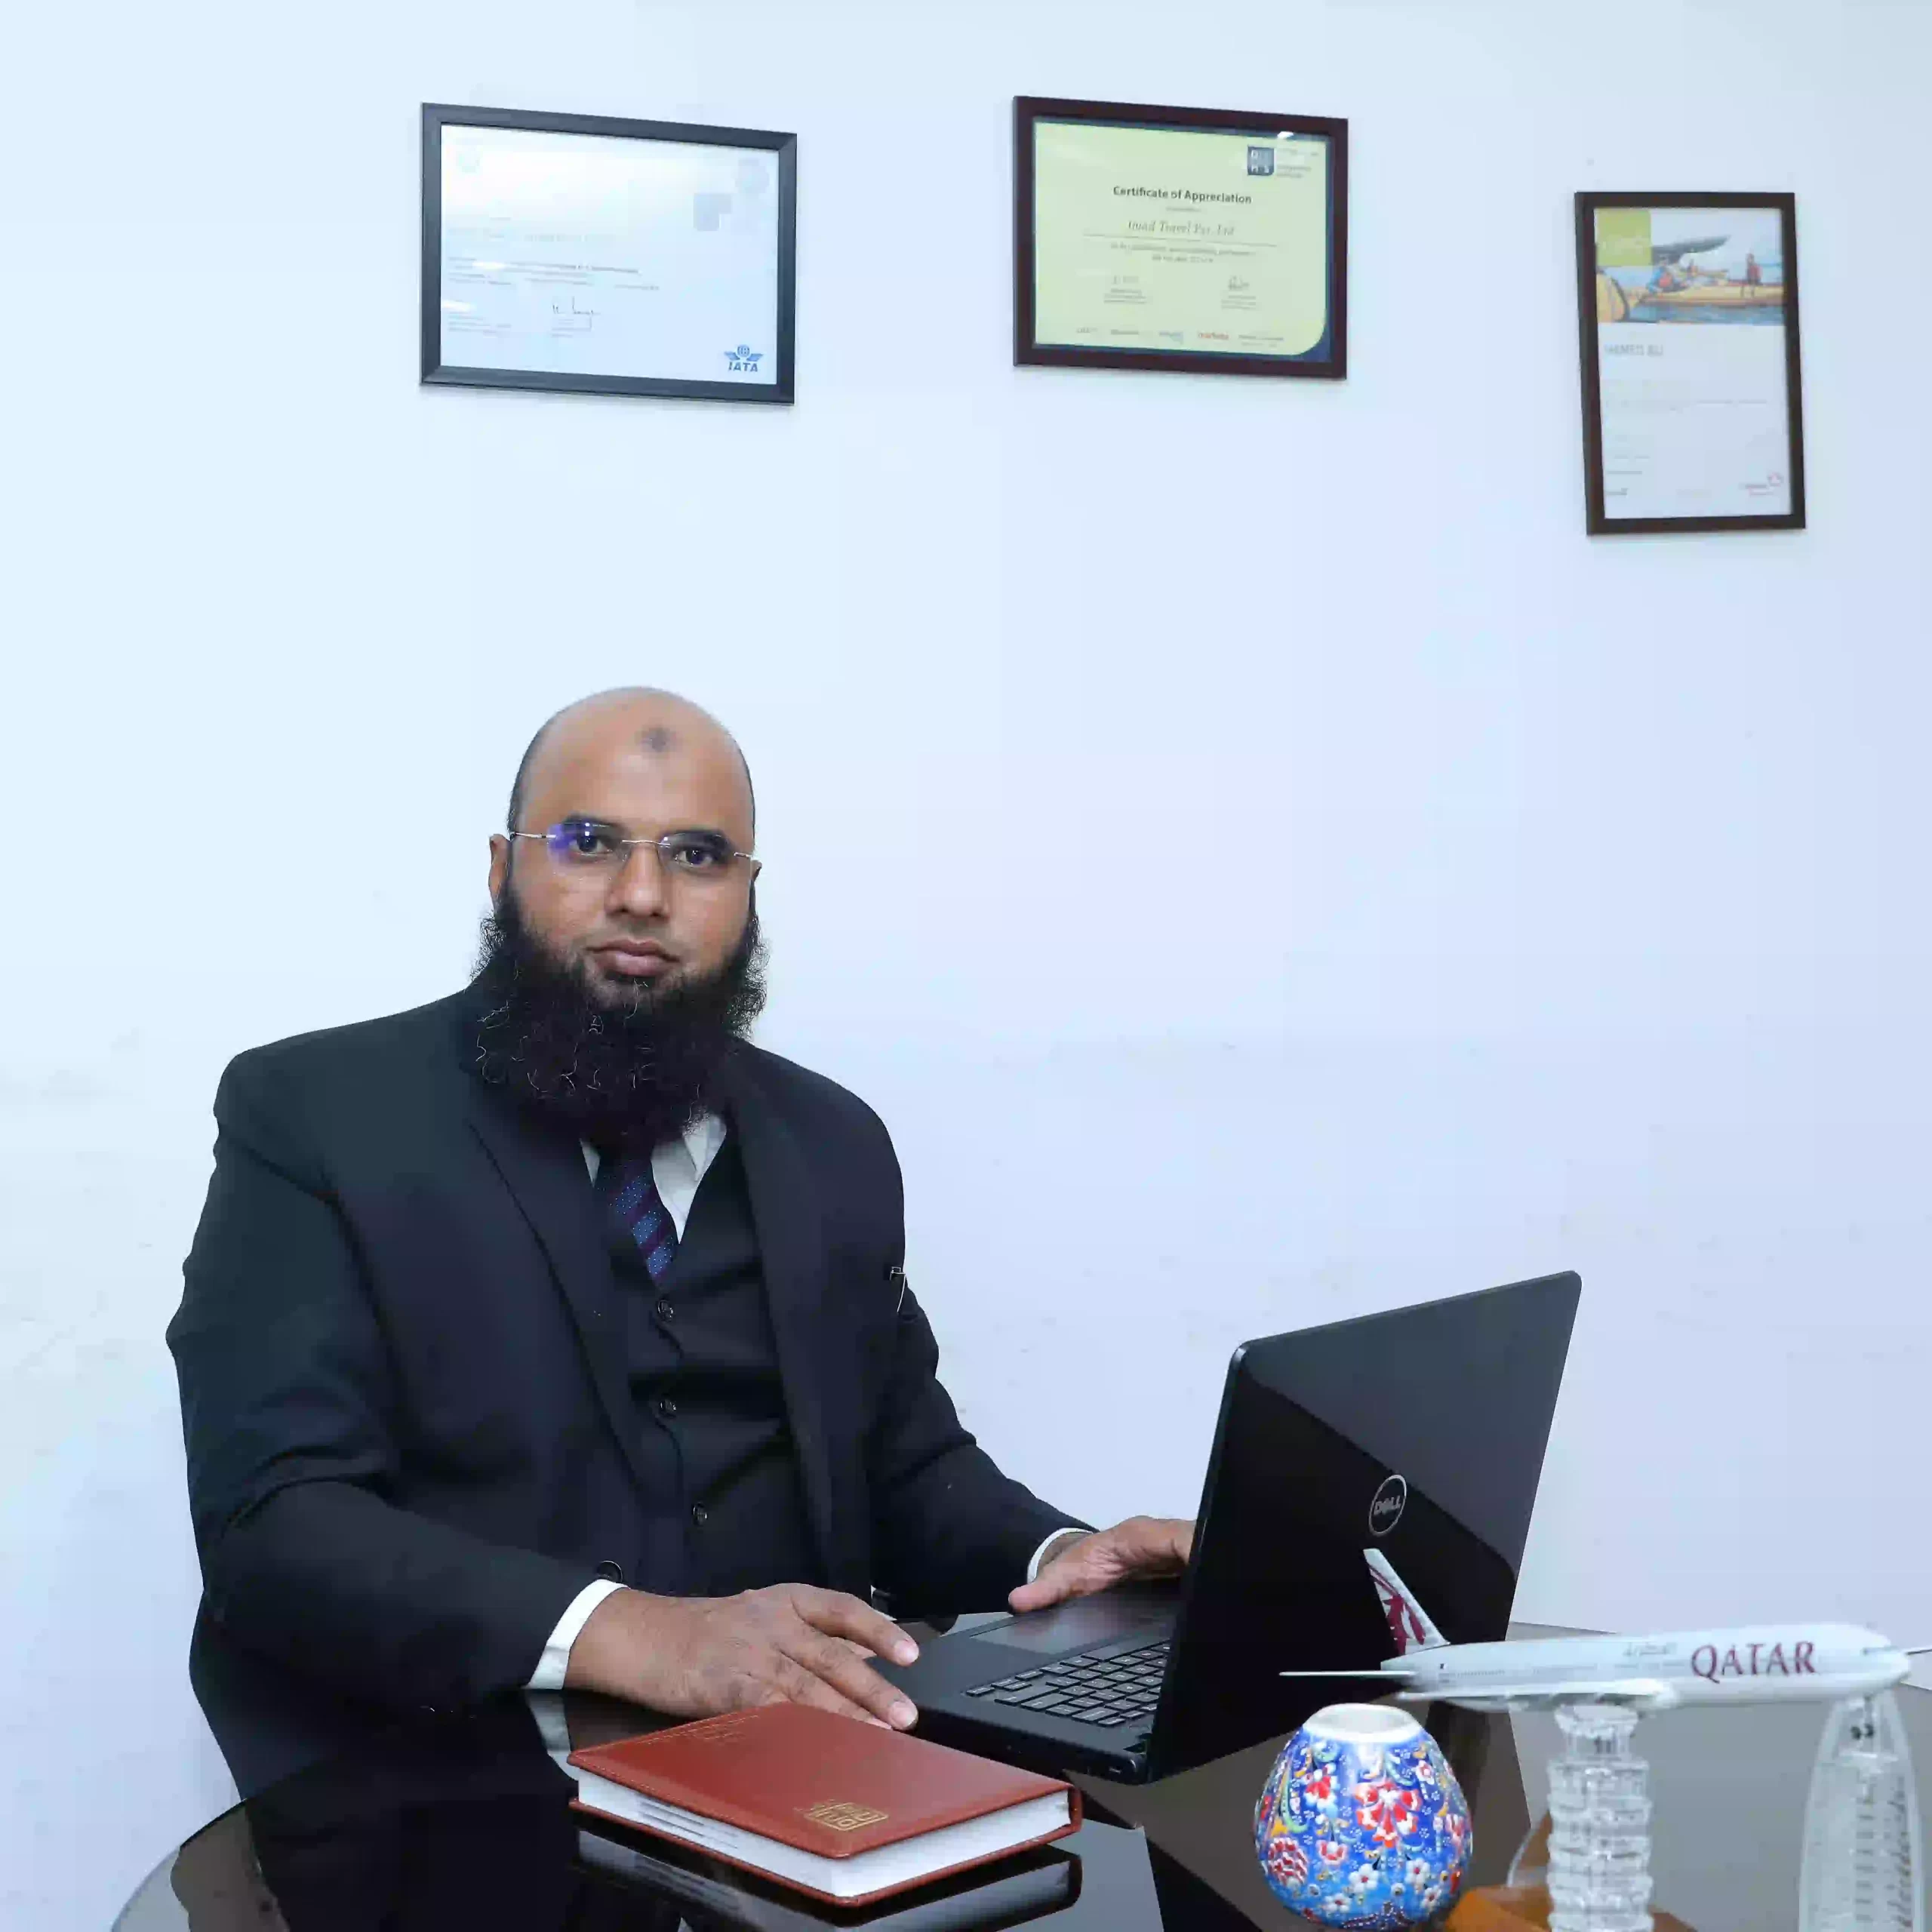 Mr.-HAMED-ALI-is-an-owner-Director-of-IMAD-Travel-Private-Ltd